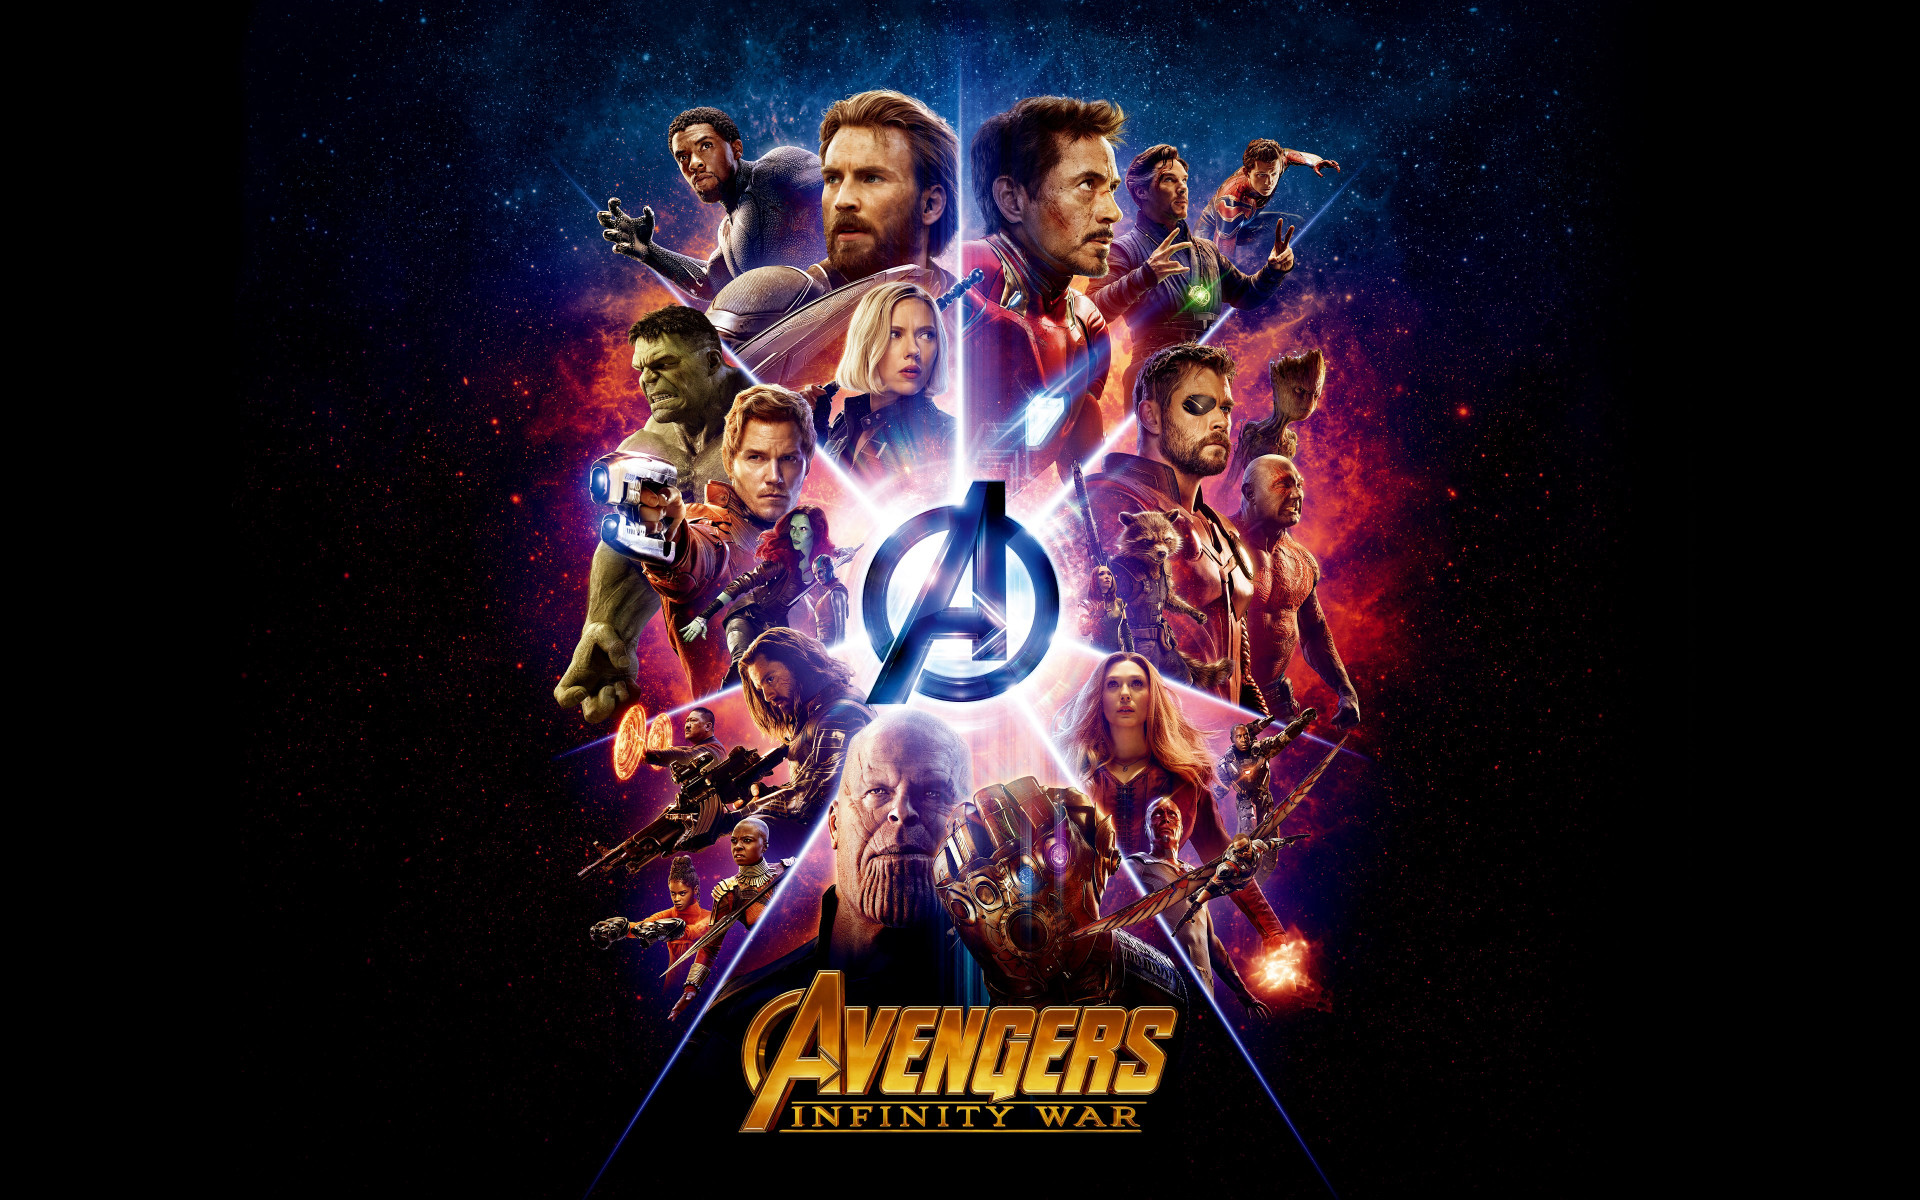 All the heroes from Avengers: Infinity War wallpaper 1920x1200